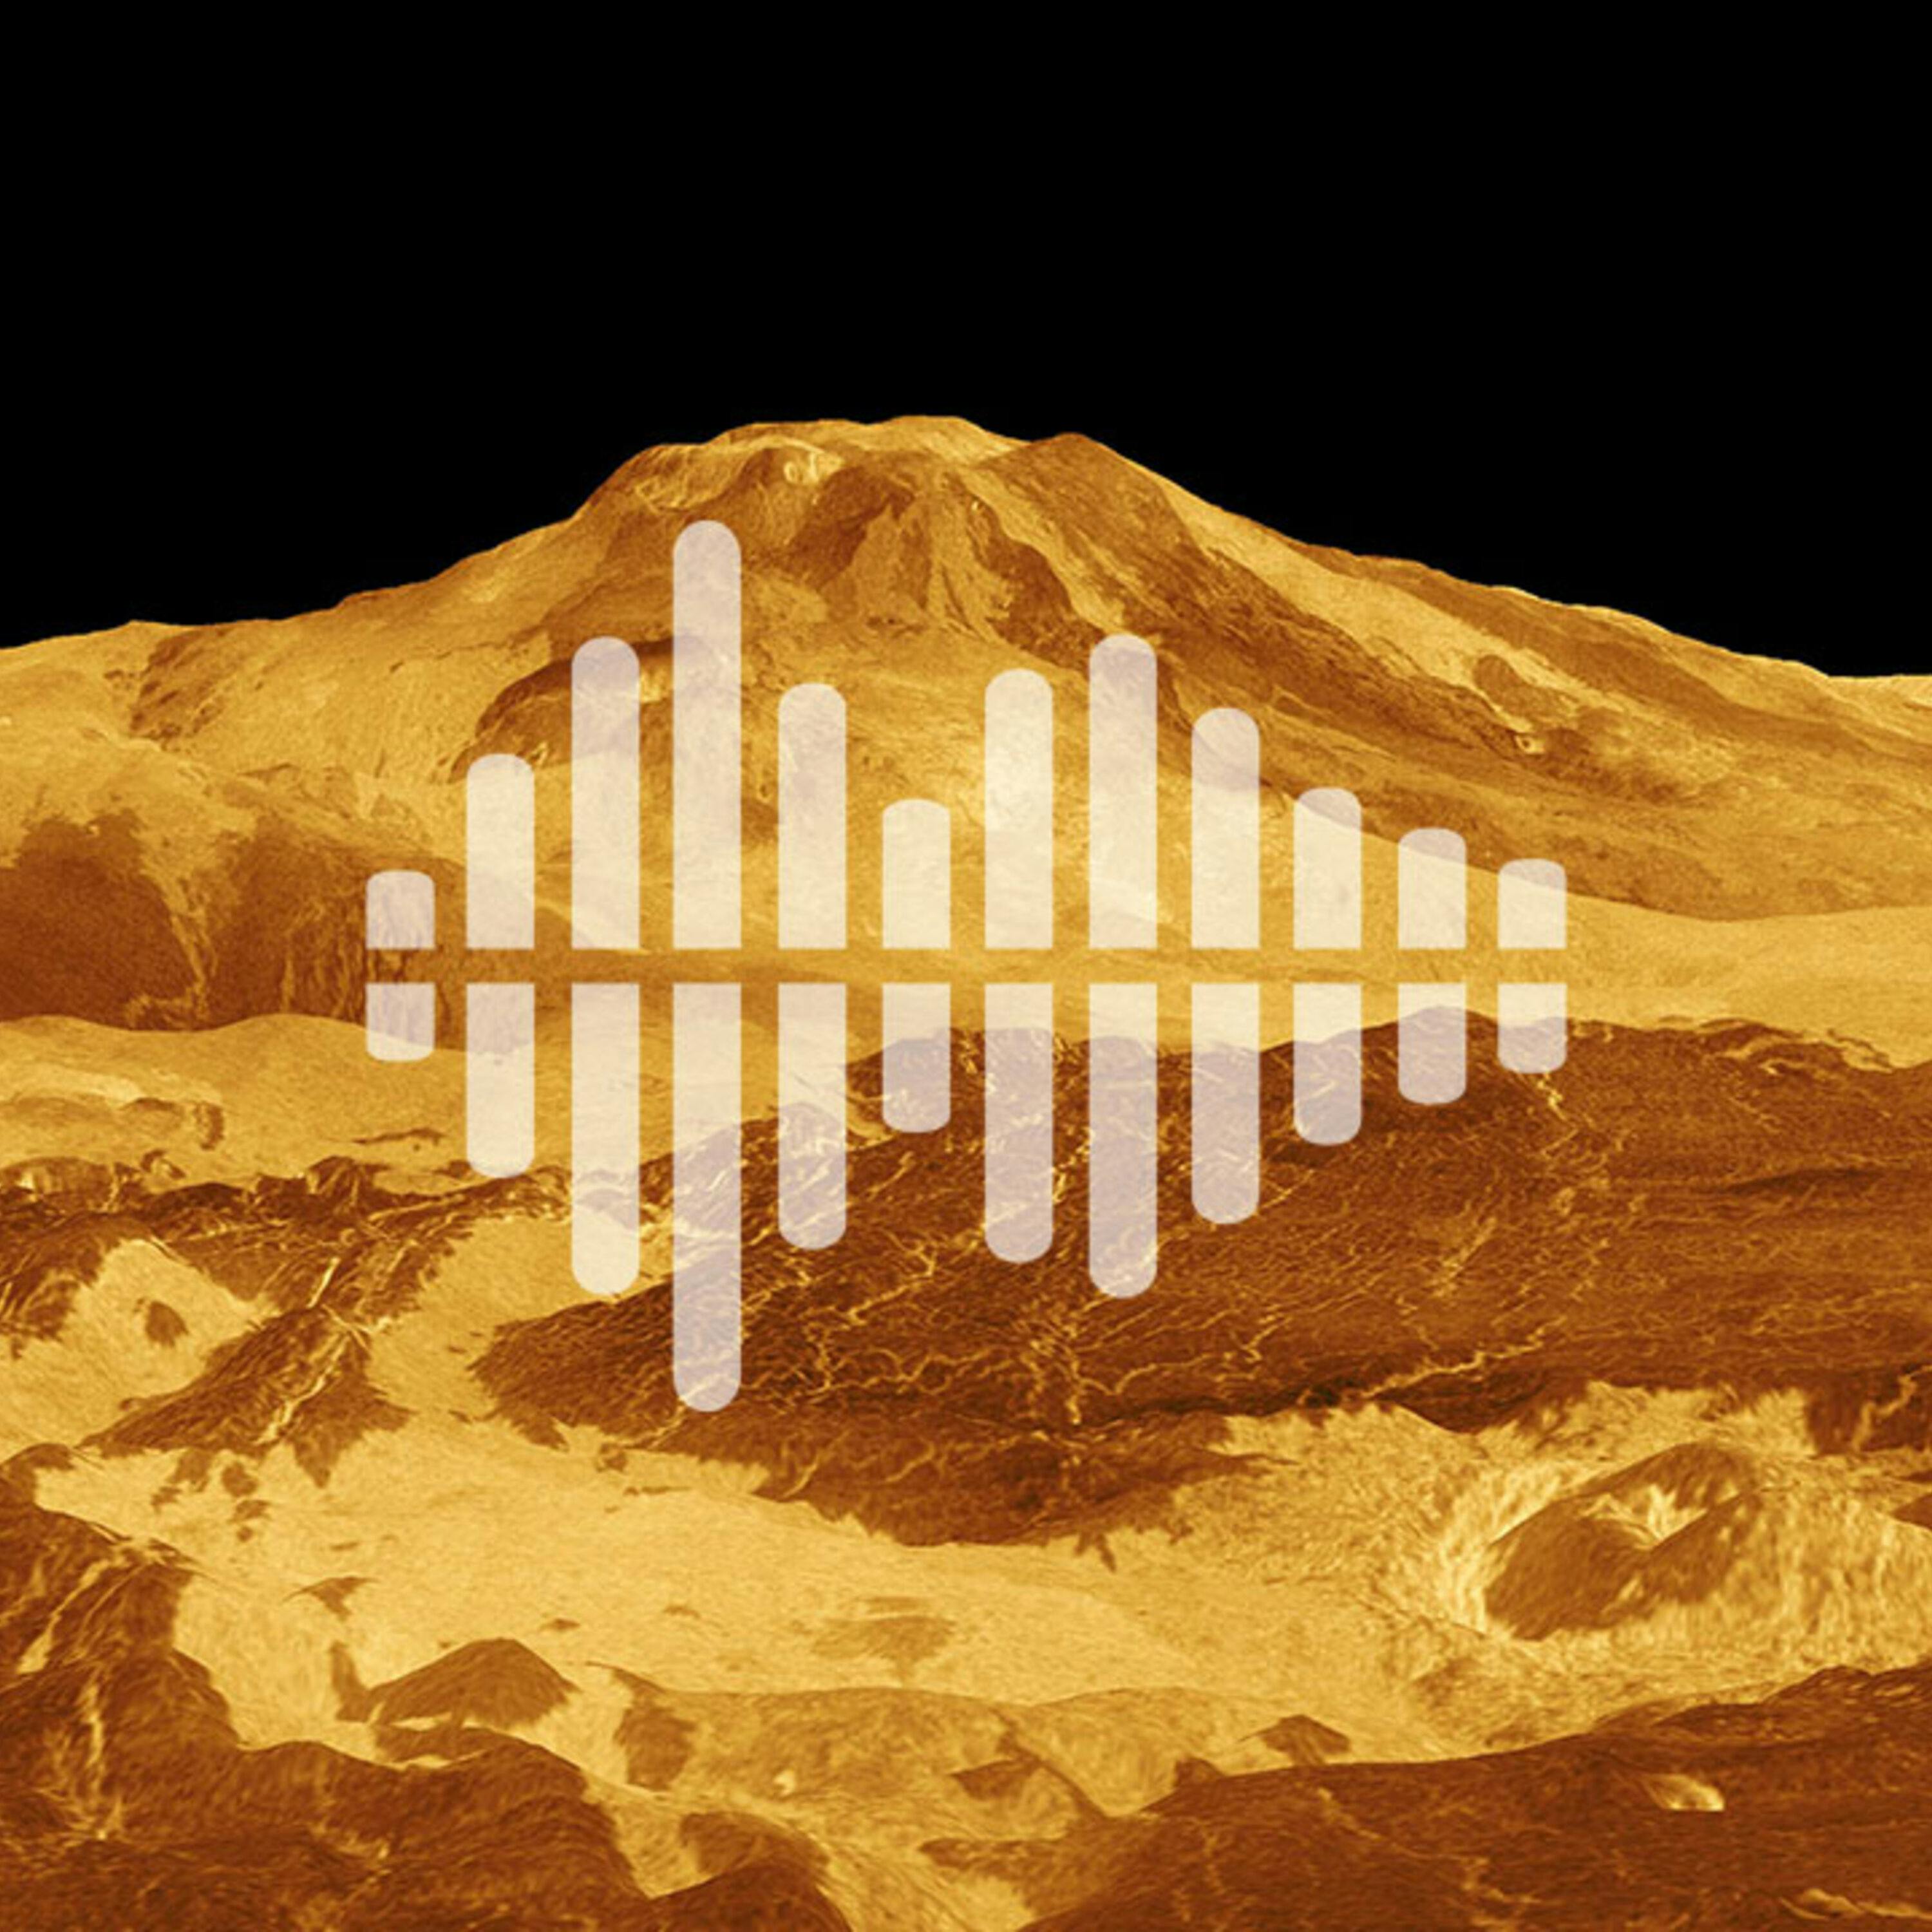 An active volcano on Venus, and a concerning rise in early onset colon cancer